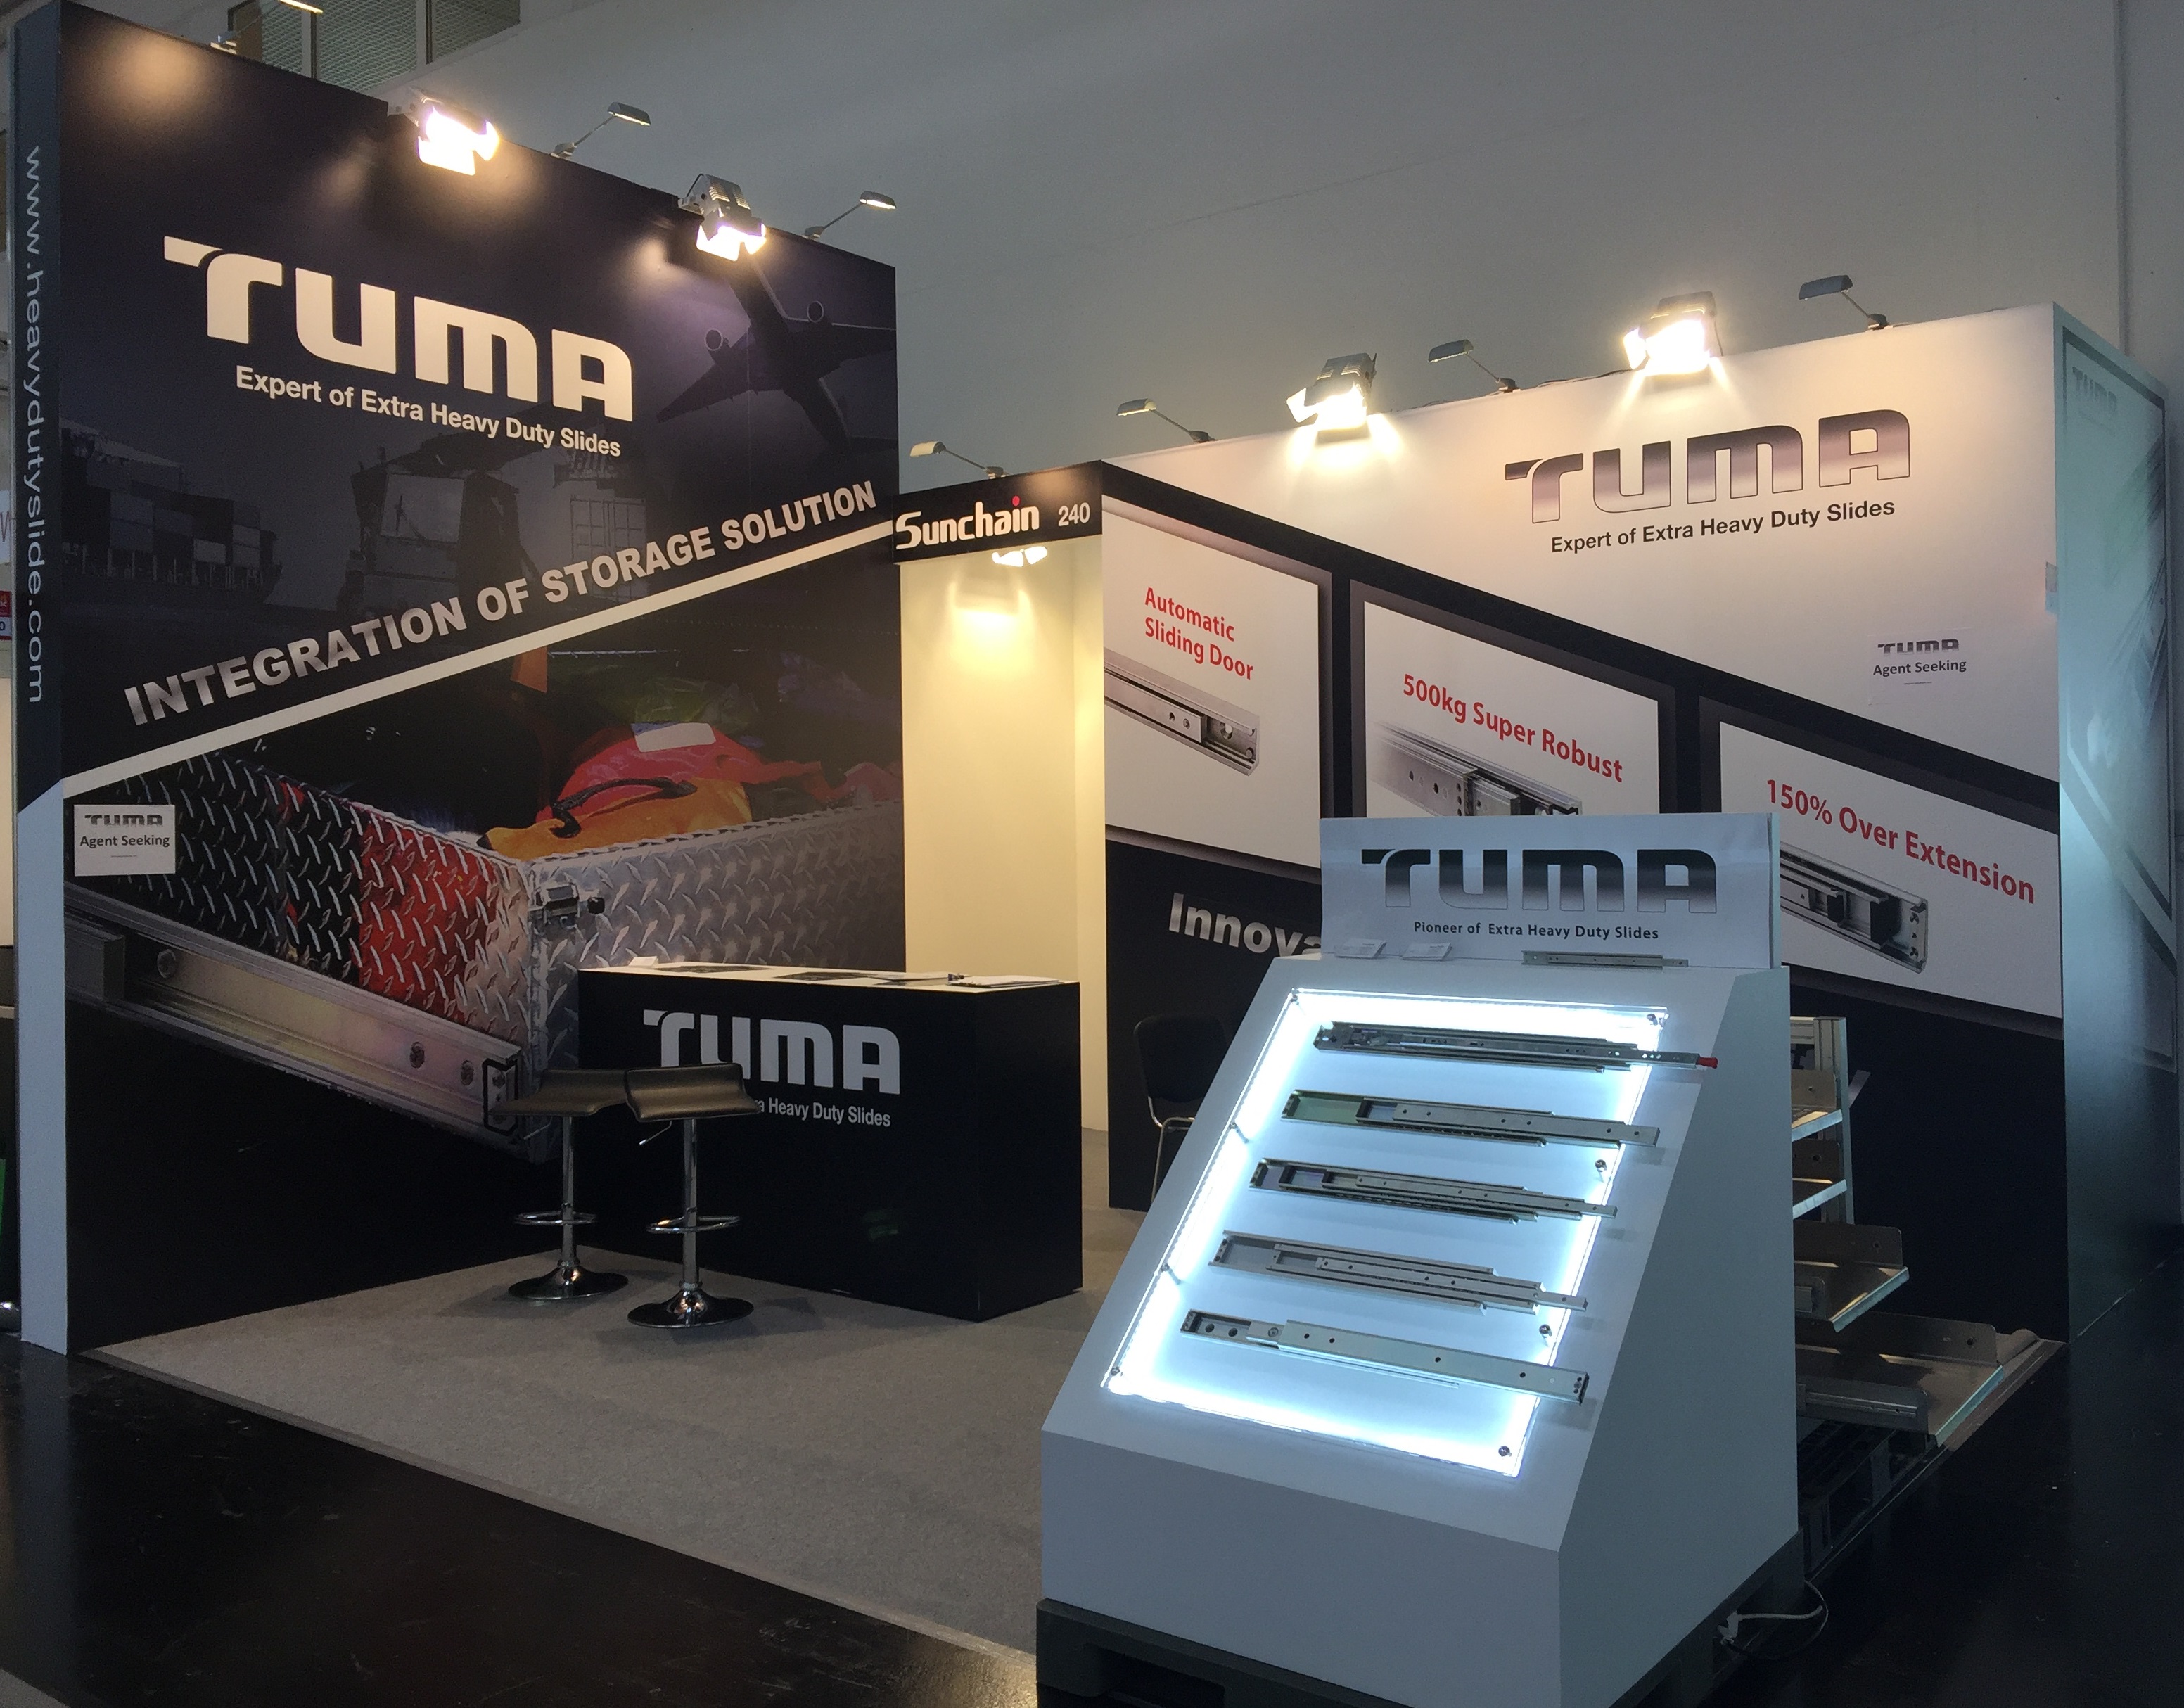 Outstanding Connection With Transport Logistic 2017 Trend By TUMA extra heavy duty drawer slides,heavy duty rail slides,heavy duty slide,heavy duty full extension ball bearing drawer slides,heavy duty cabinet drawer slides,heavy duty cabinet slides,industrial drawer slides,heavy duty glides,heavy duty industrial drawer slides,heavy duty ball bearing slides,ball bearing slides heavy duty,full extension heavy duty drawer slides,heavy duty drawer slides,draw slides heavy duty,heavy duty slide rails,heavy duty drawer slide,tool box drawer slides,heavy duty full extension drawer slides,heavy duty undermount drawer slides,drawer slides heavy duty,heavy duty pantry slides,drawer slides heavy duty industrial,heavy duty sliding rails,drawer slides heavy duty industrial,industrial drawer slides,heavy duty industrial drawer slides,industrial slide rails,industrial telescopic slides,heavy duty industrial slides